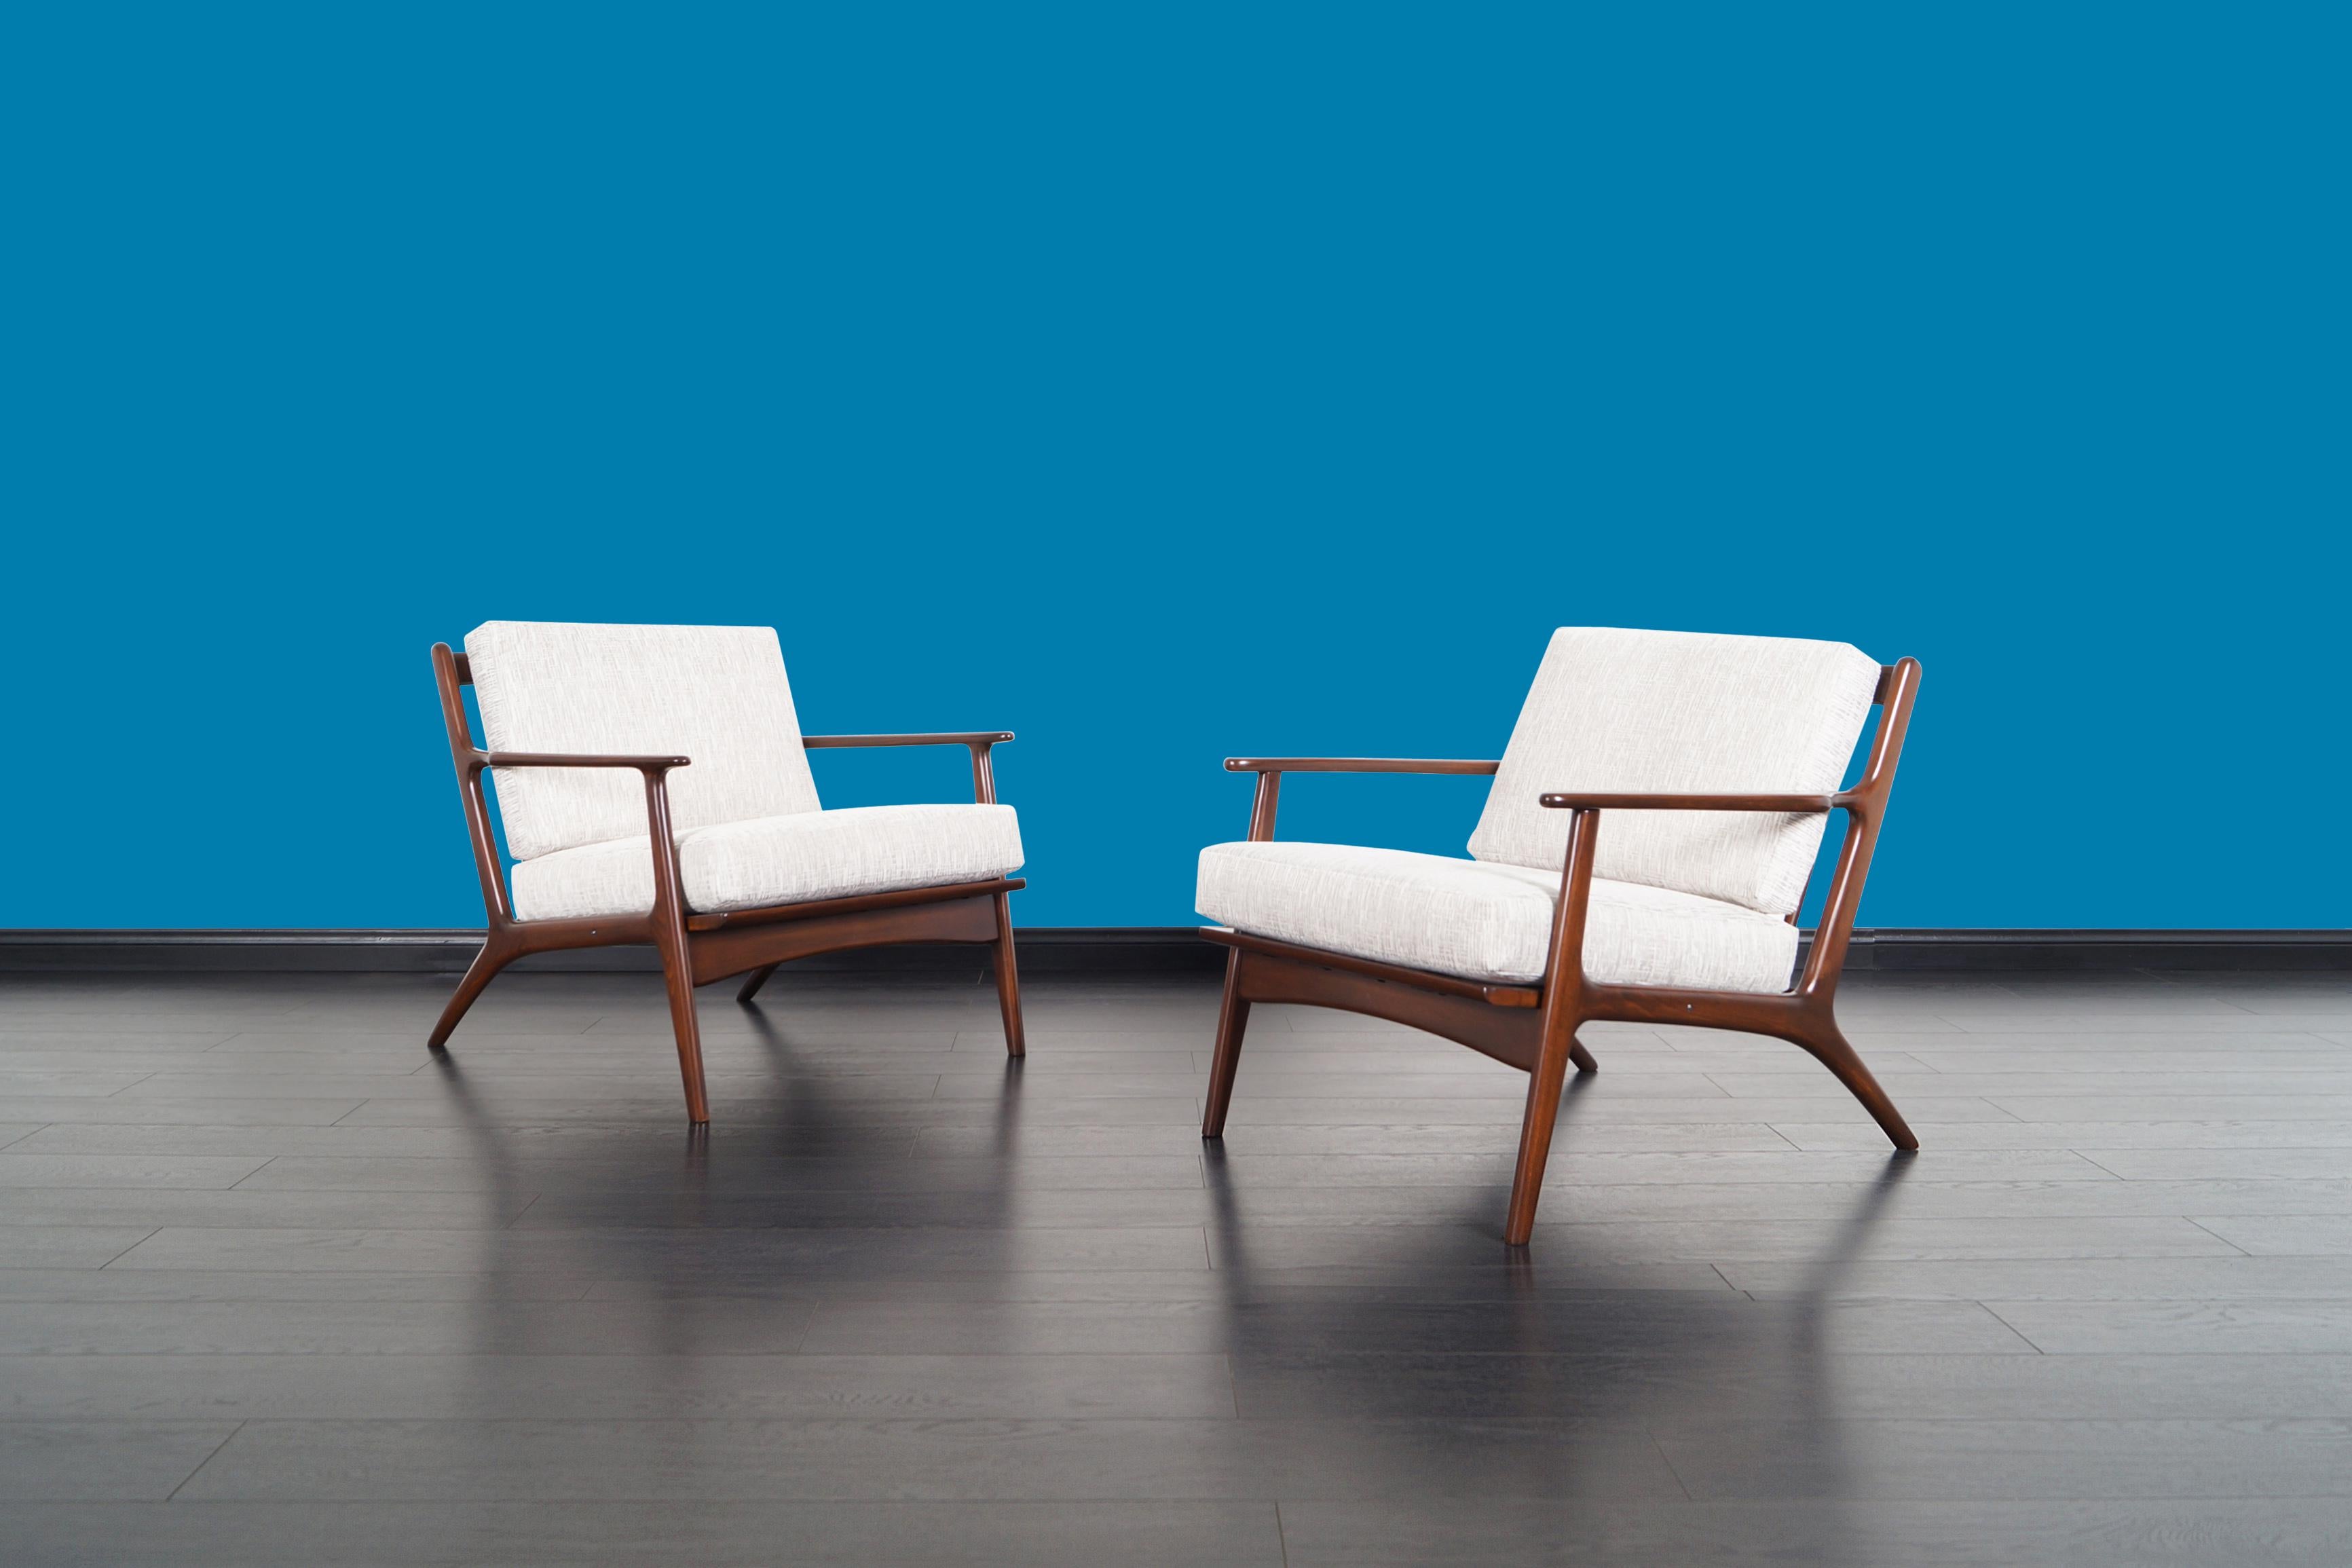 Spectacular pair of vintage lounge chairs designed and manufactured in Italy, circa 1950s. These elegant lounge chairs feature a solid walnut stained beech frame with sculptural armrests and slatted backrest, assuring a sleek profile view from all